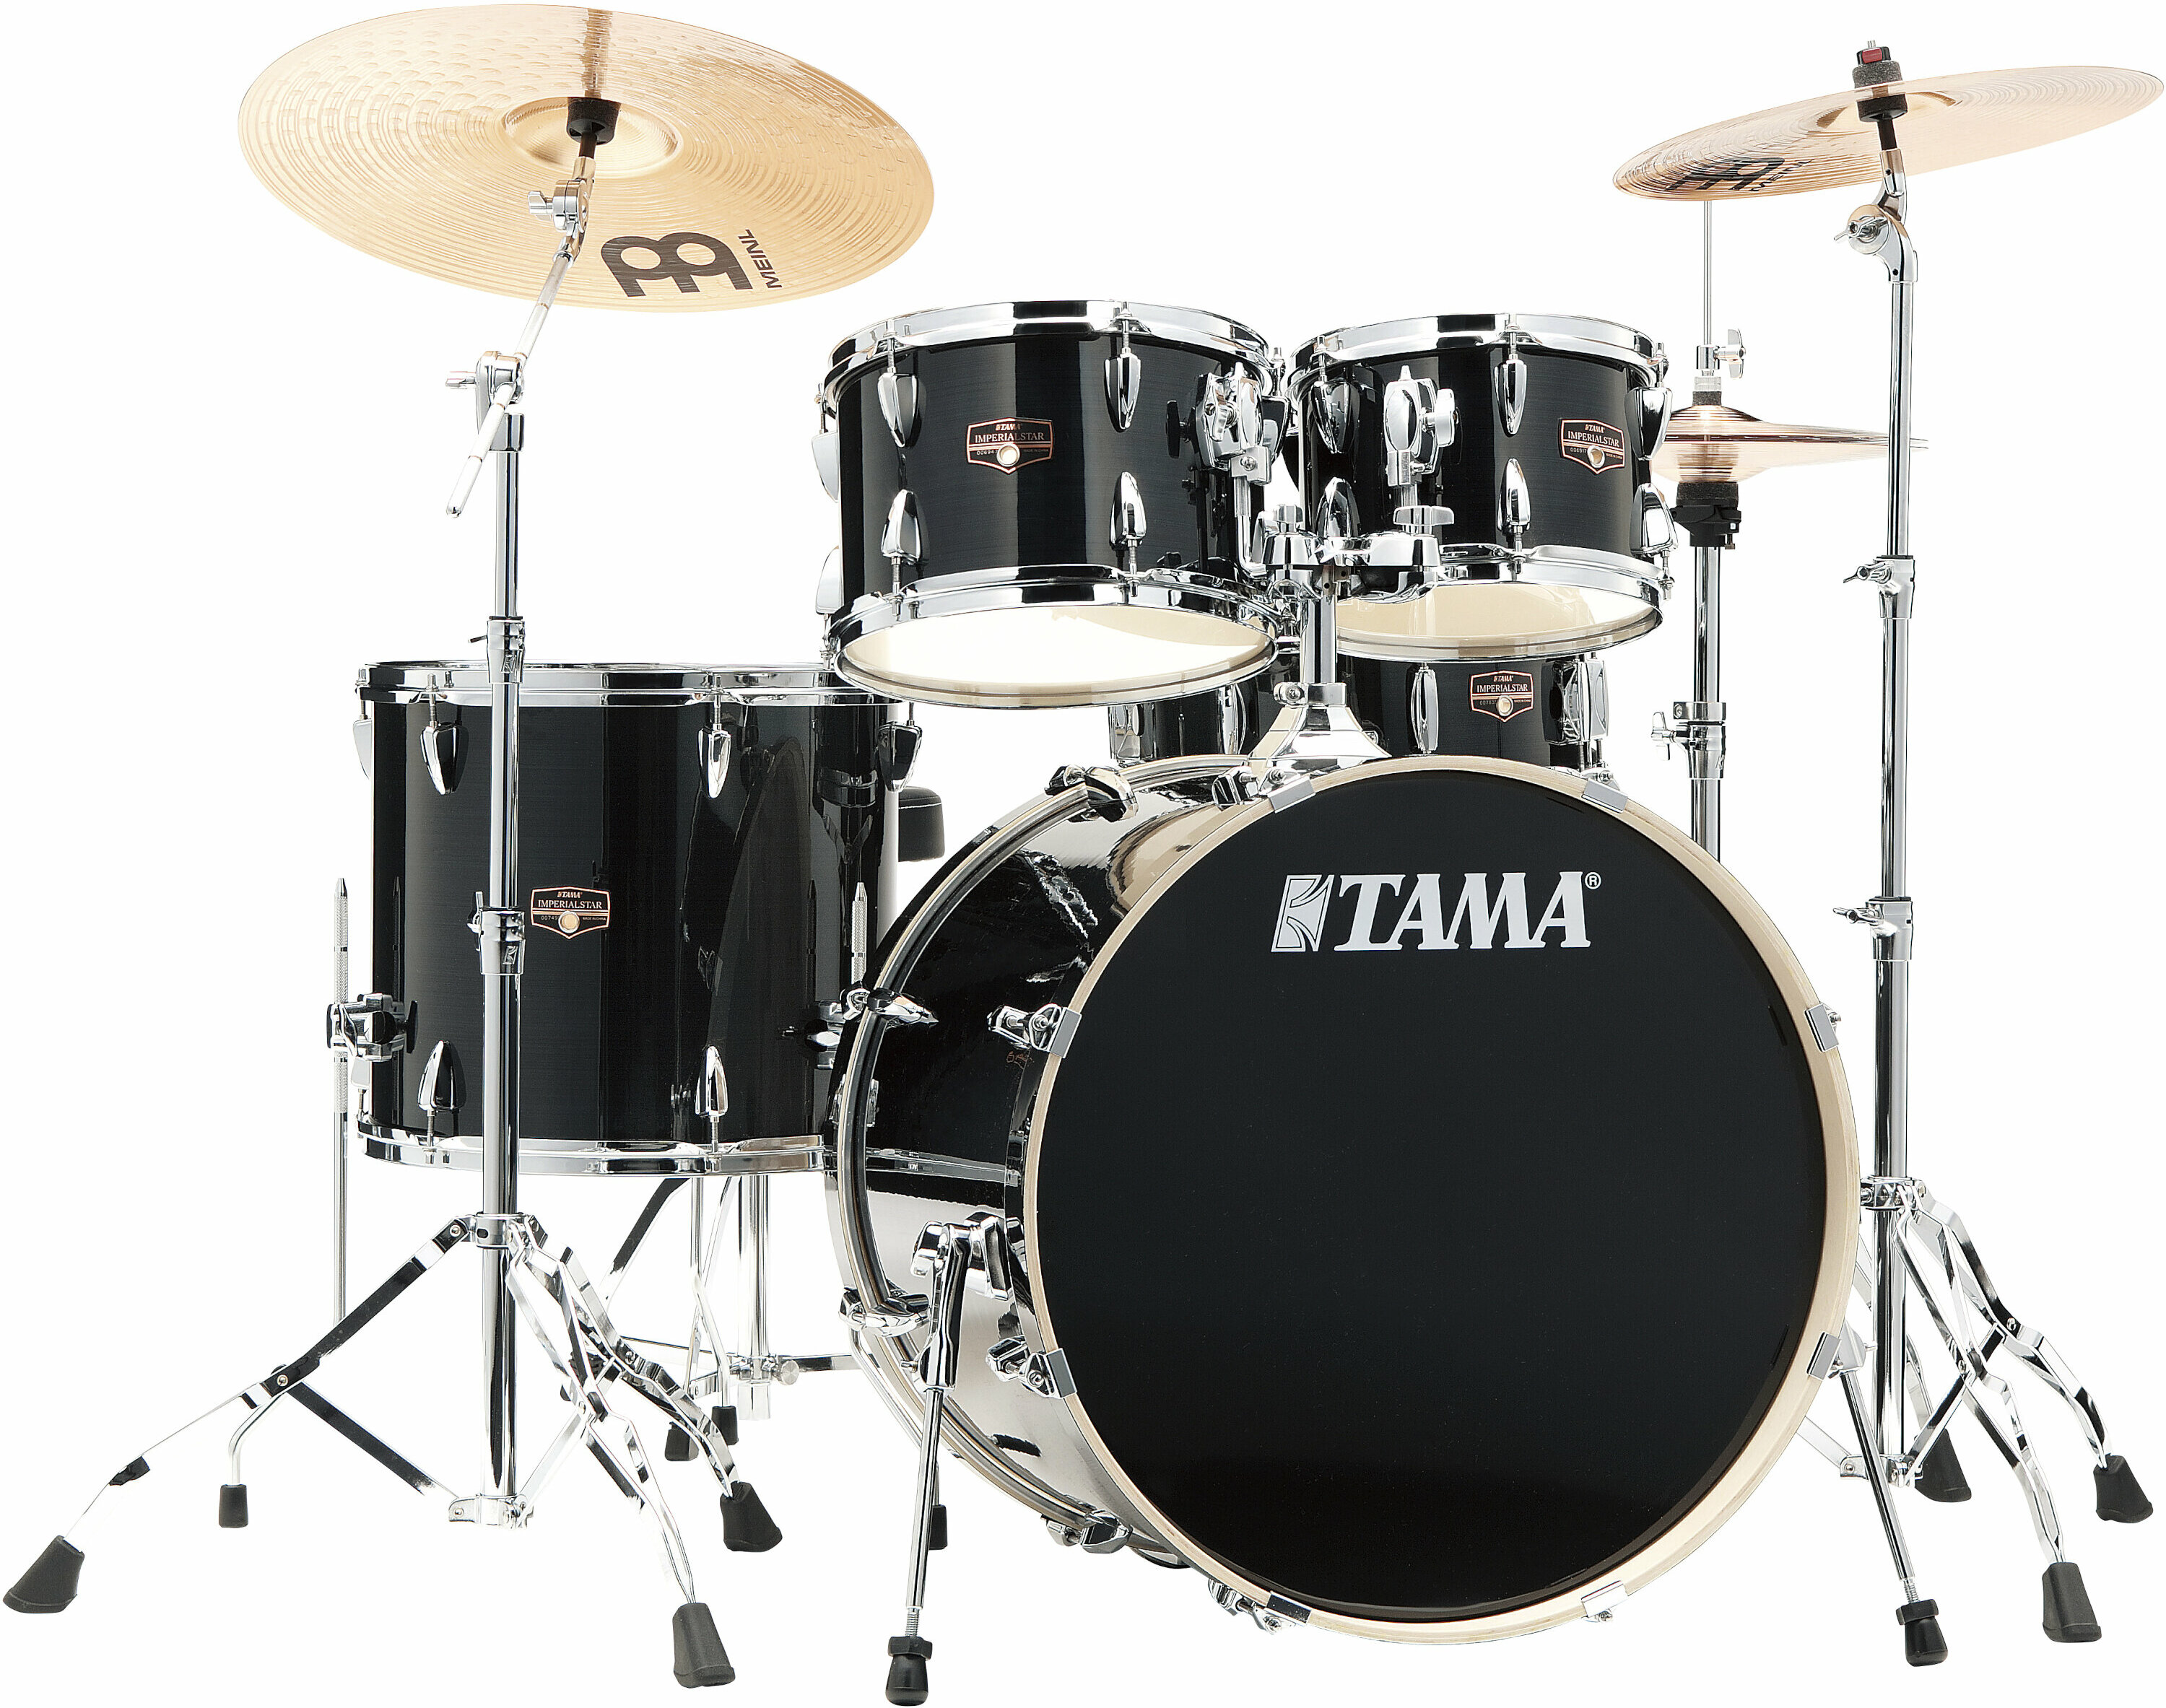 Tama Imperialstar Cl 5 Futs Shell Kit + Meinl Cymbal - Hairline Black - Batterie Acoustique Standard - Main picture